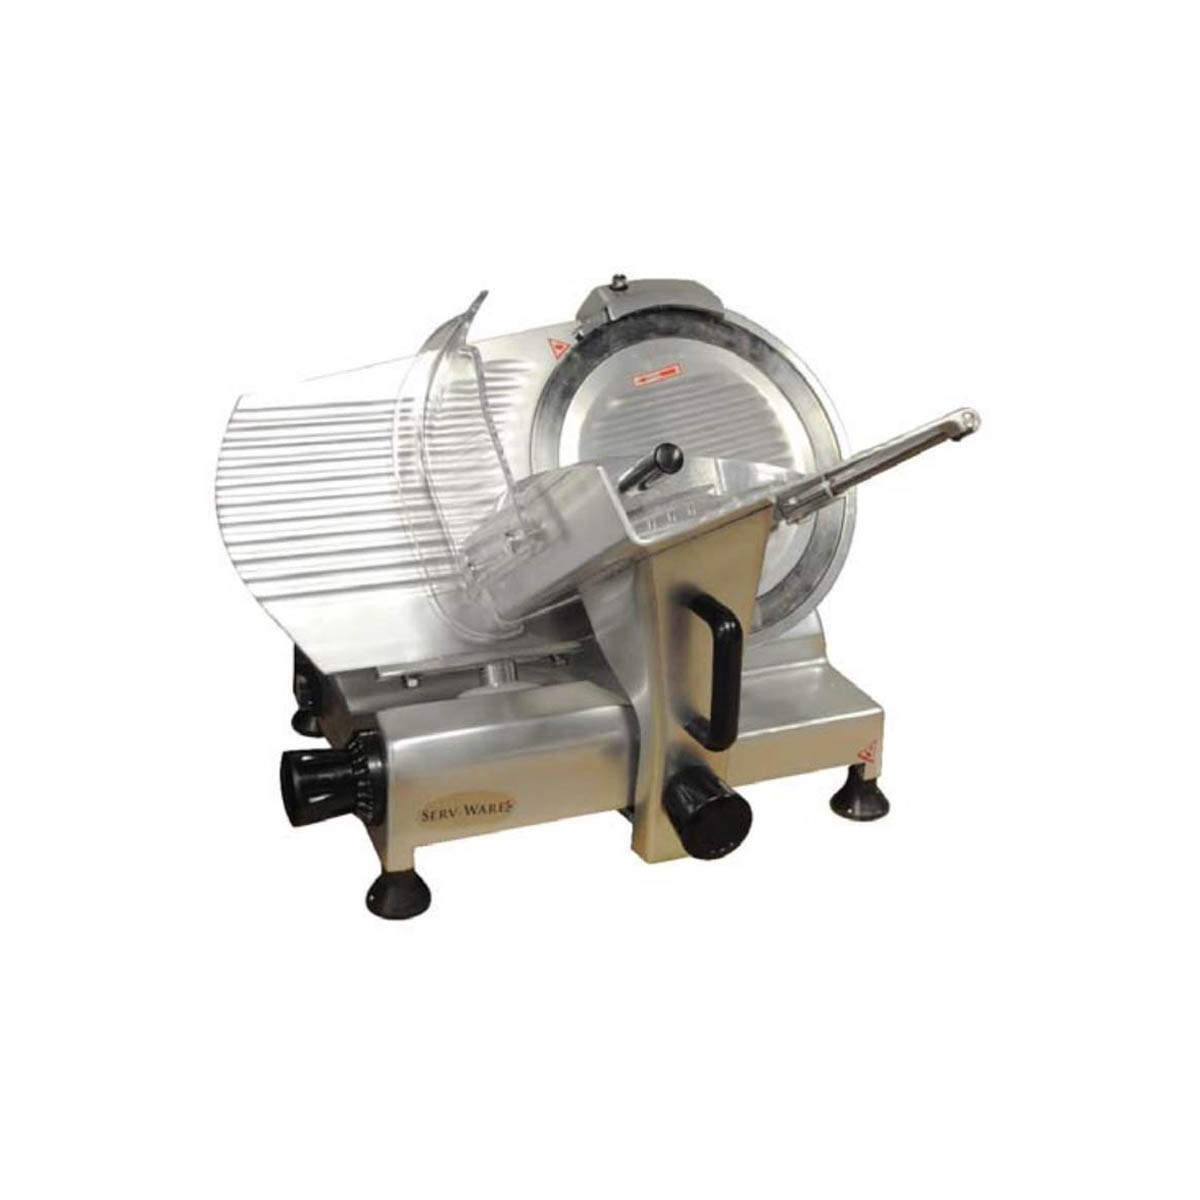 Serv-Ware SLC-12 Manual Feed Food Slicer with 12″ Blade, Gravity Feed, Single Speed